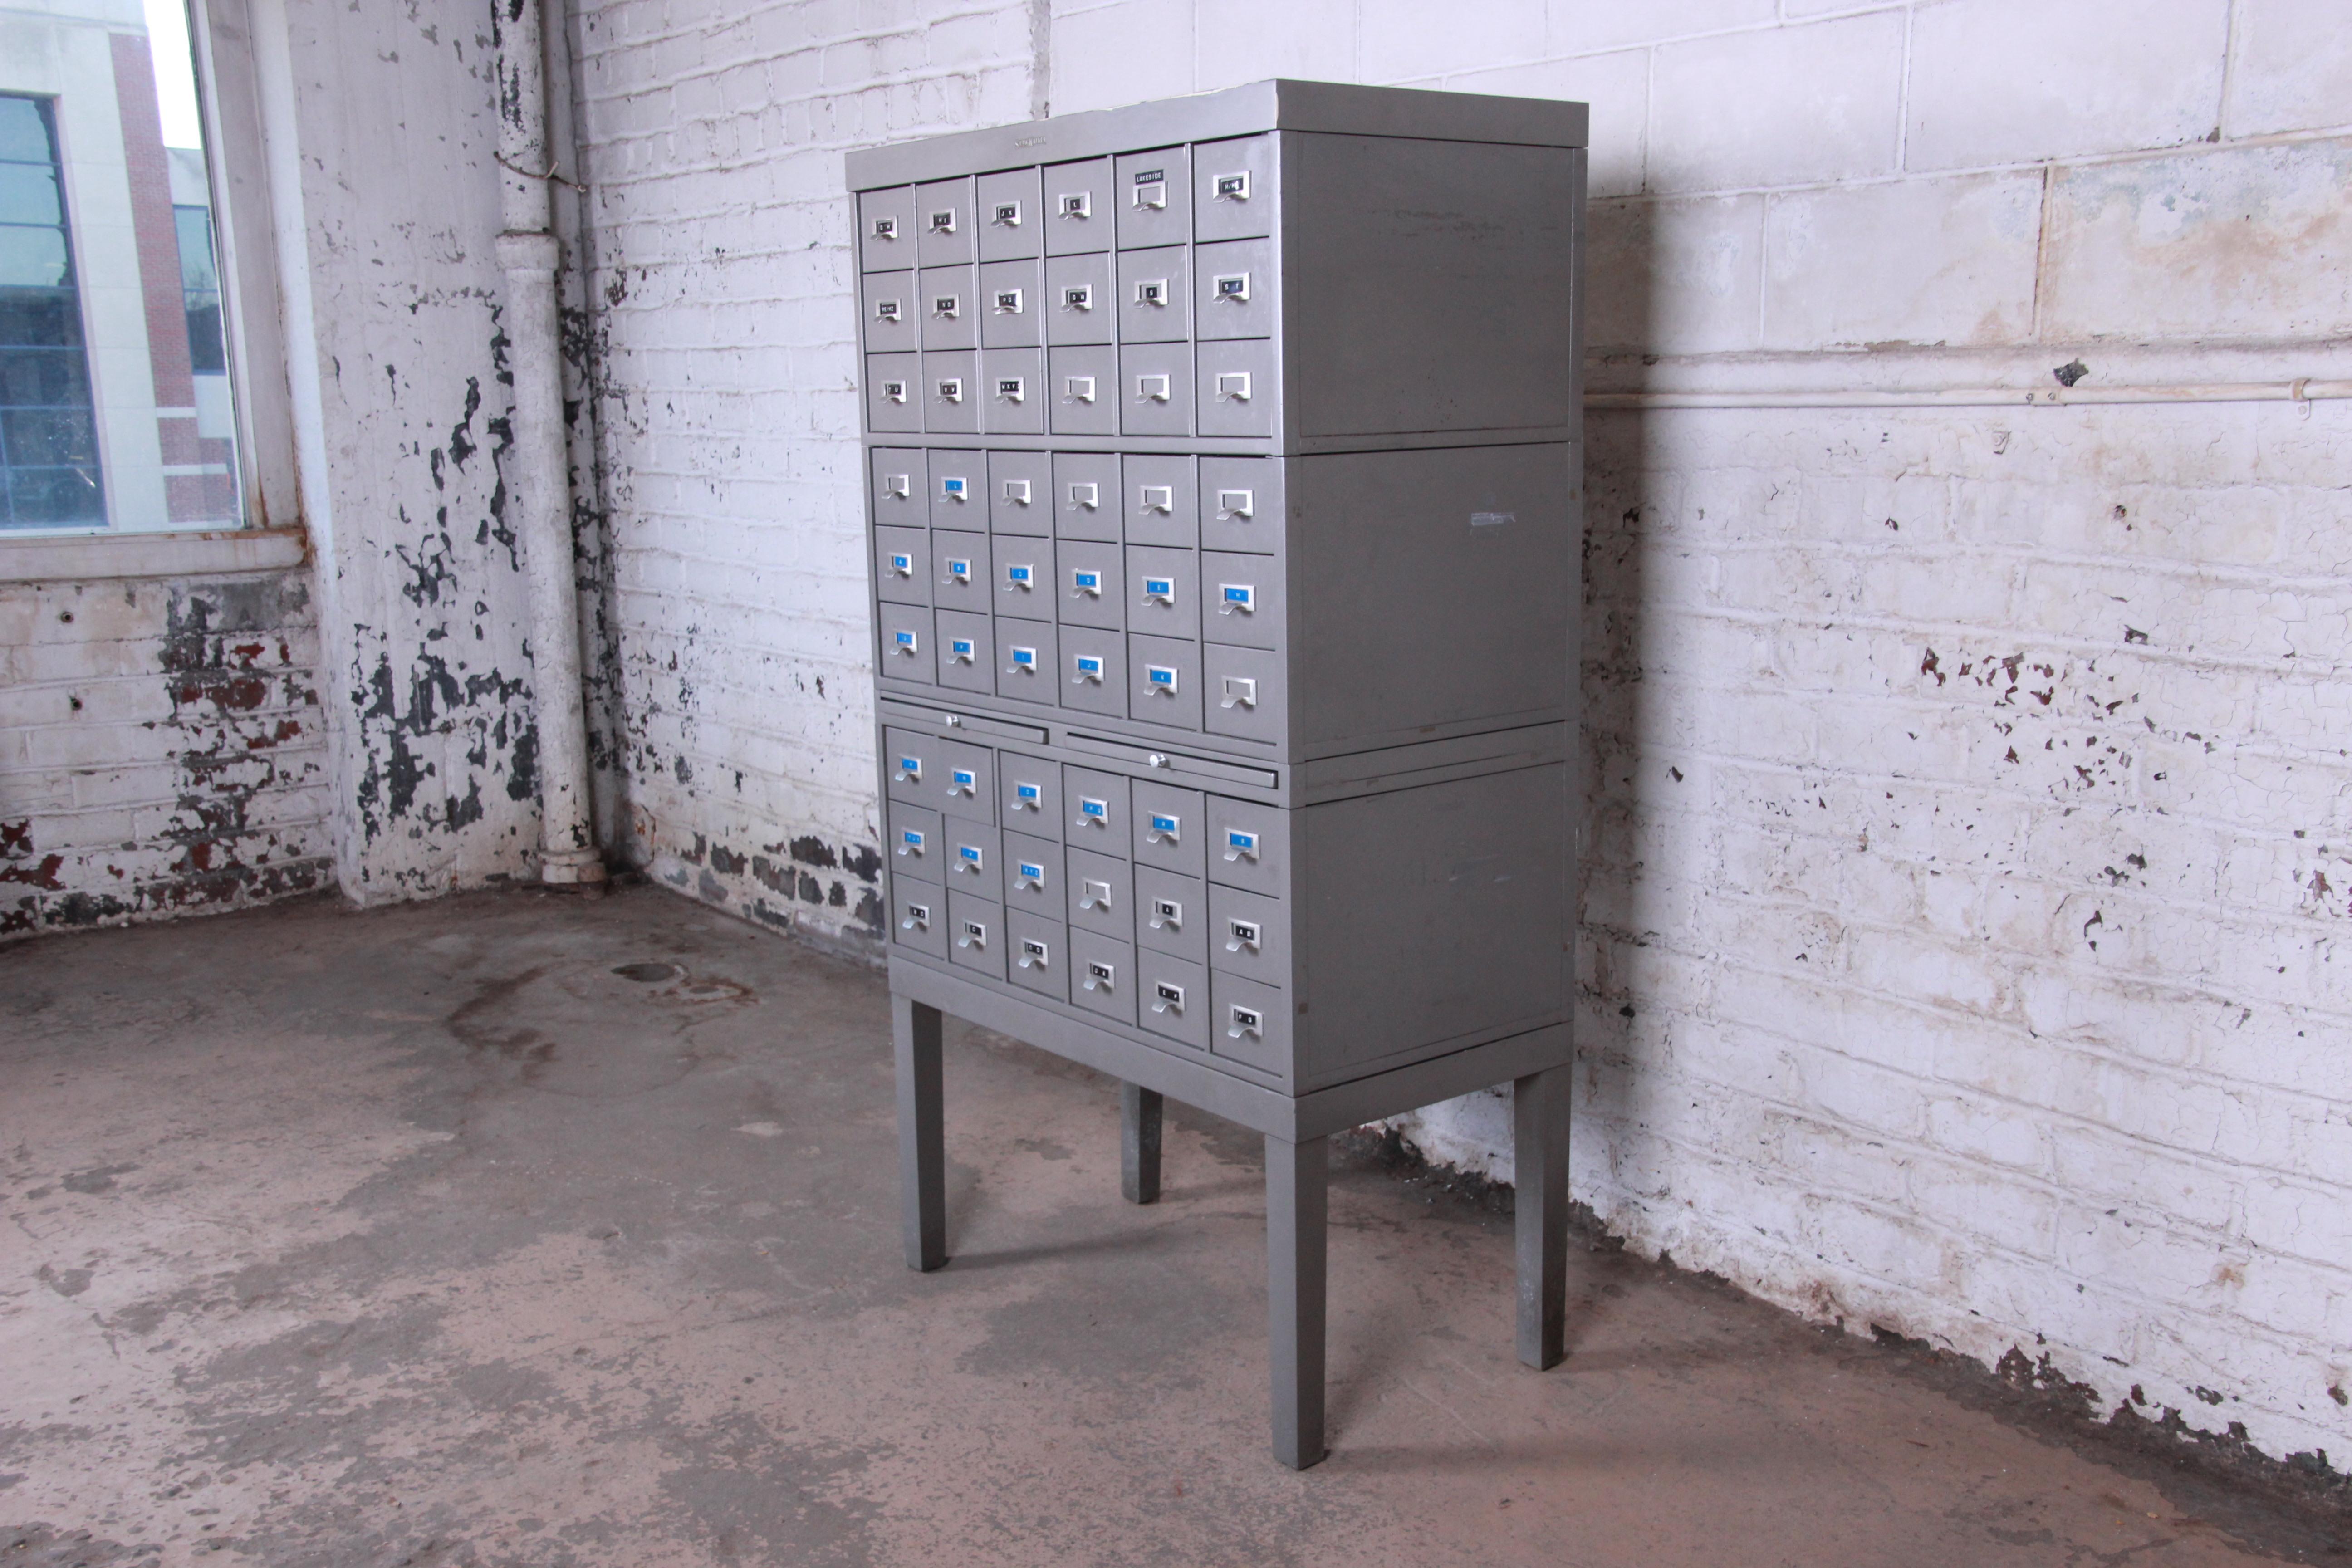 A rare and unique Mid-Century Modern industrial age metal library card catalog by Shaw Walker. The catalog provides excellent storage with 54 drawers. Great for tools or parts, Arts & Crafts supplies, and wine storage, among many other uses. It also